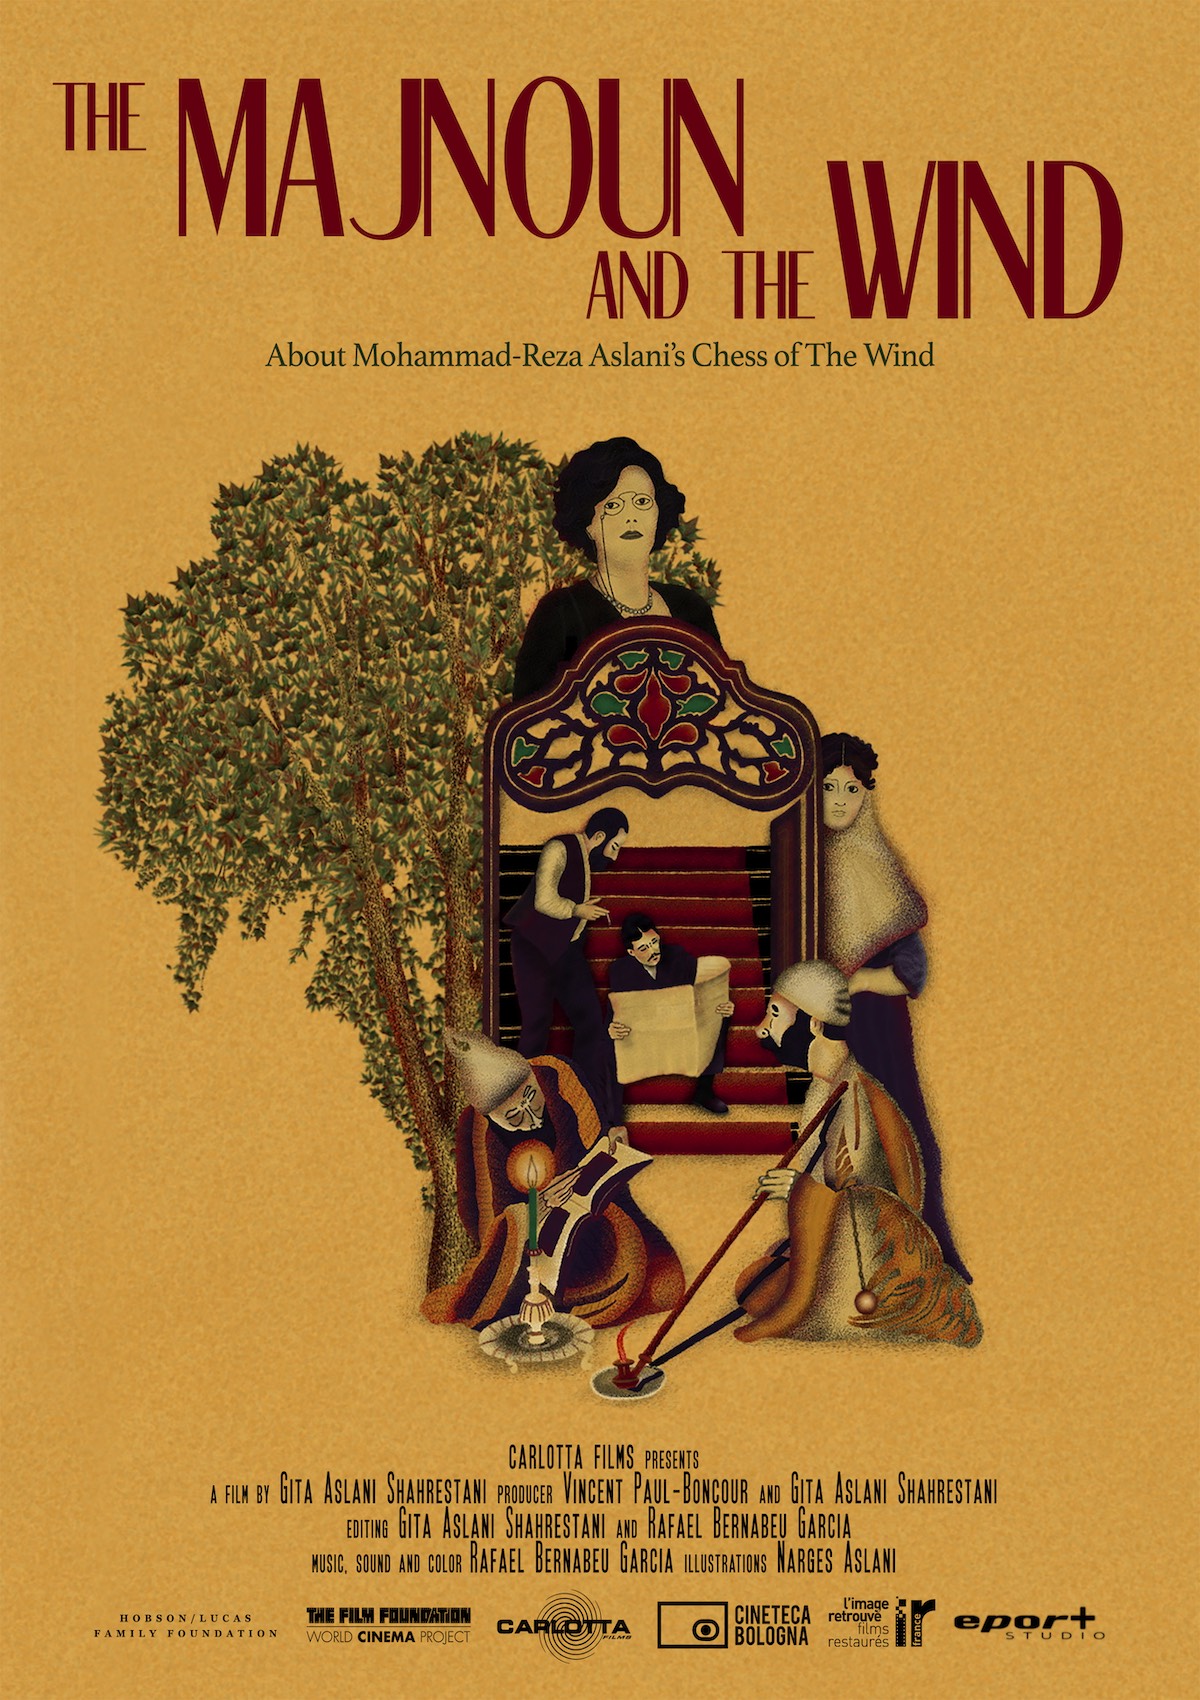 The Majnoun and the wind - poster